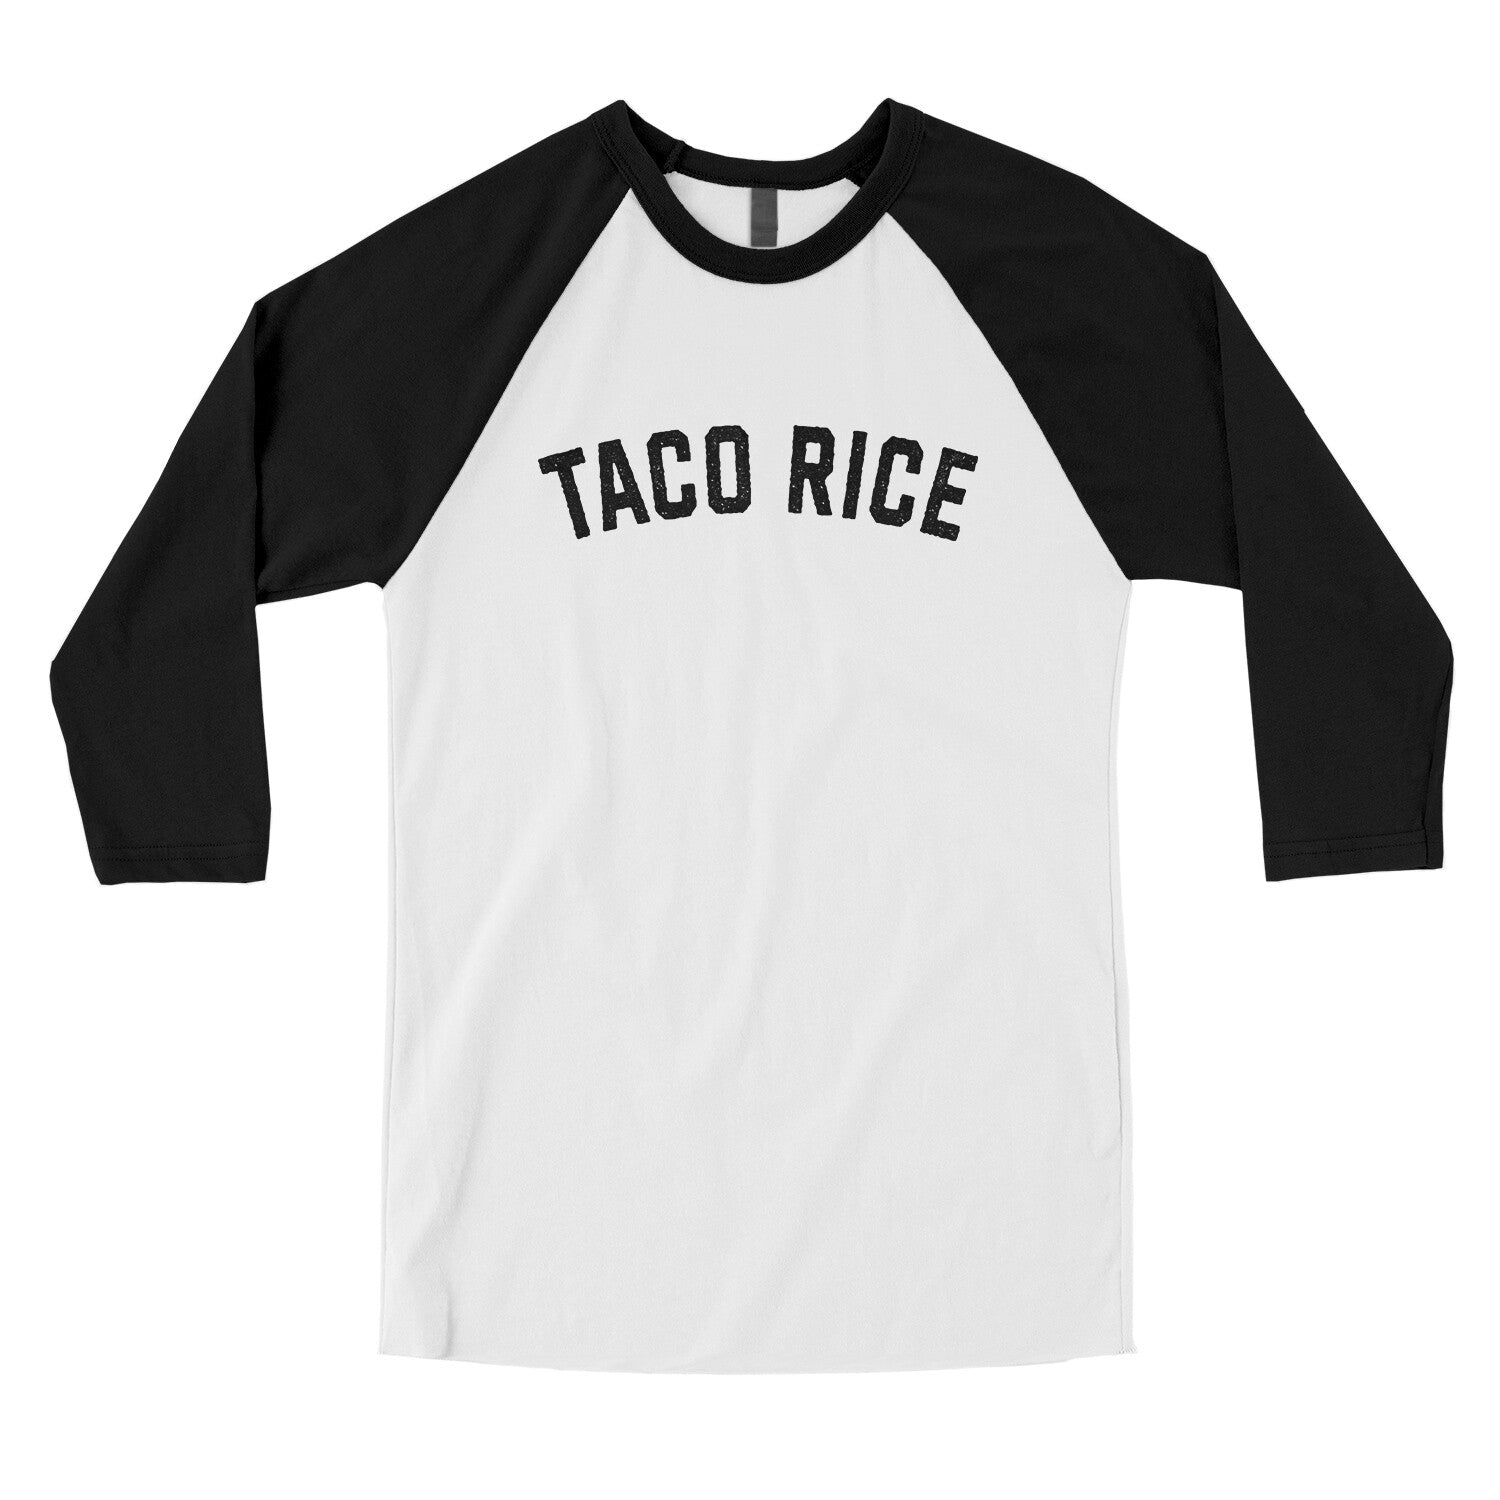 Taco Rice in White with Black Color